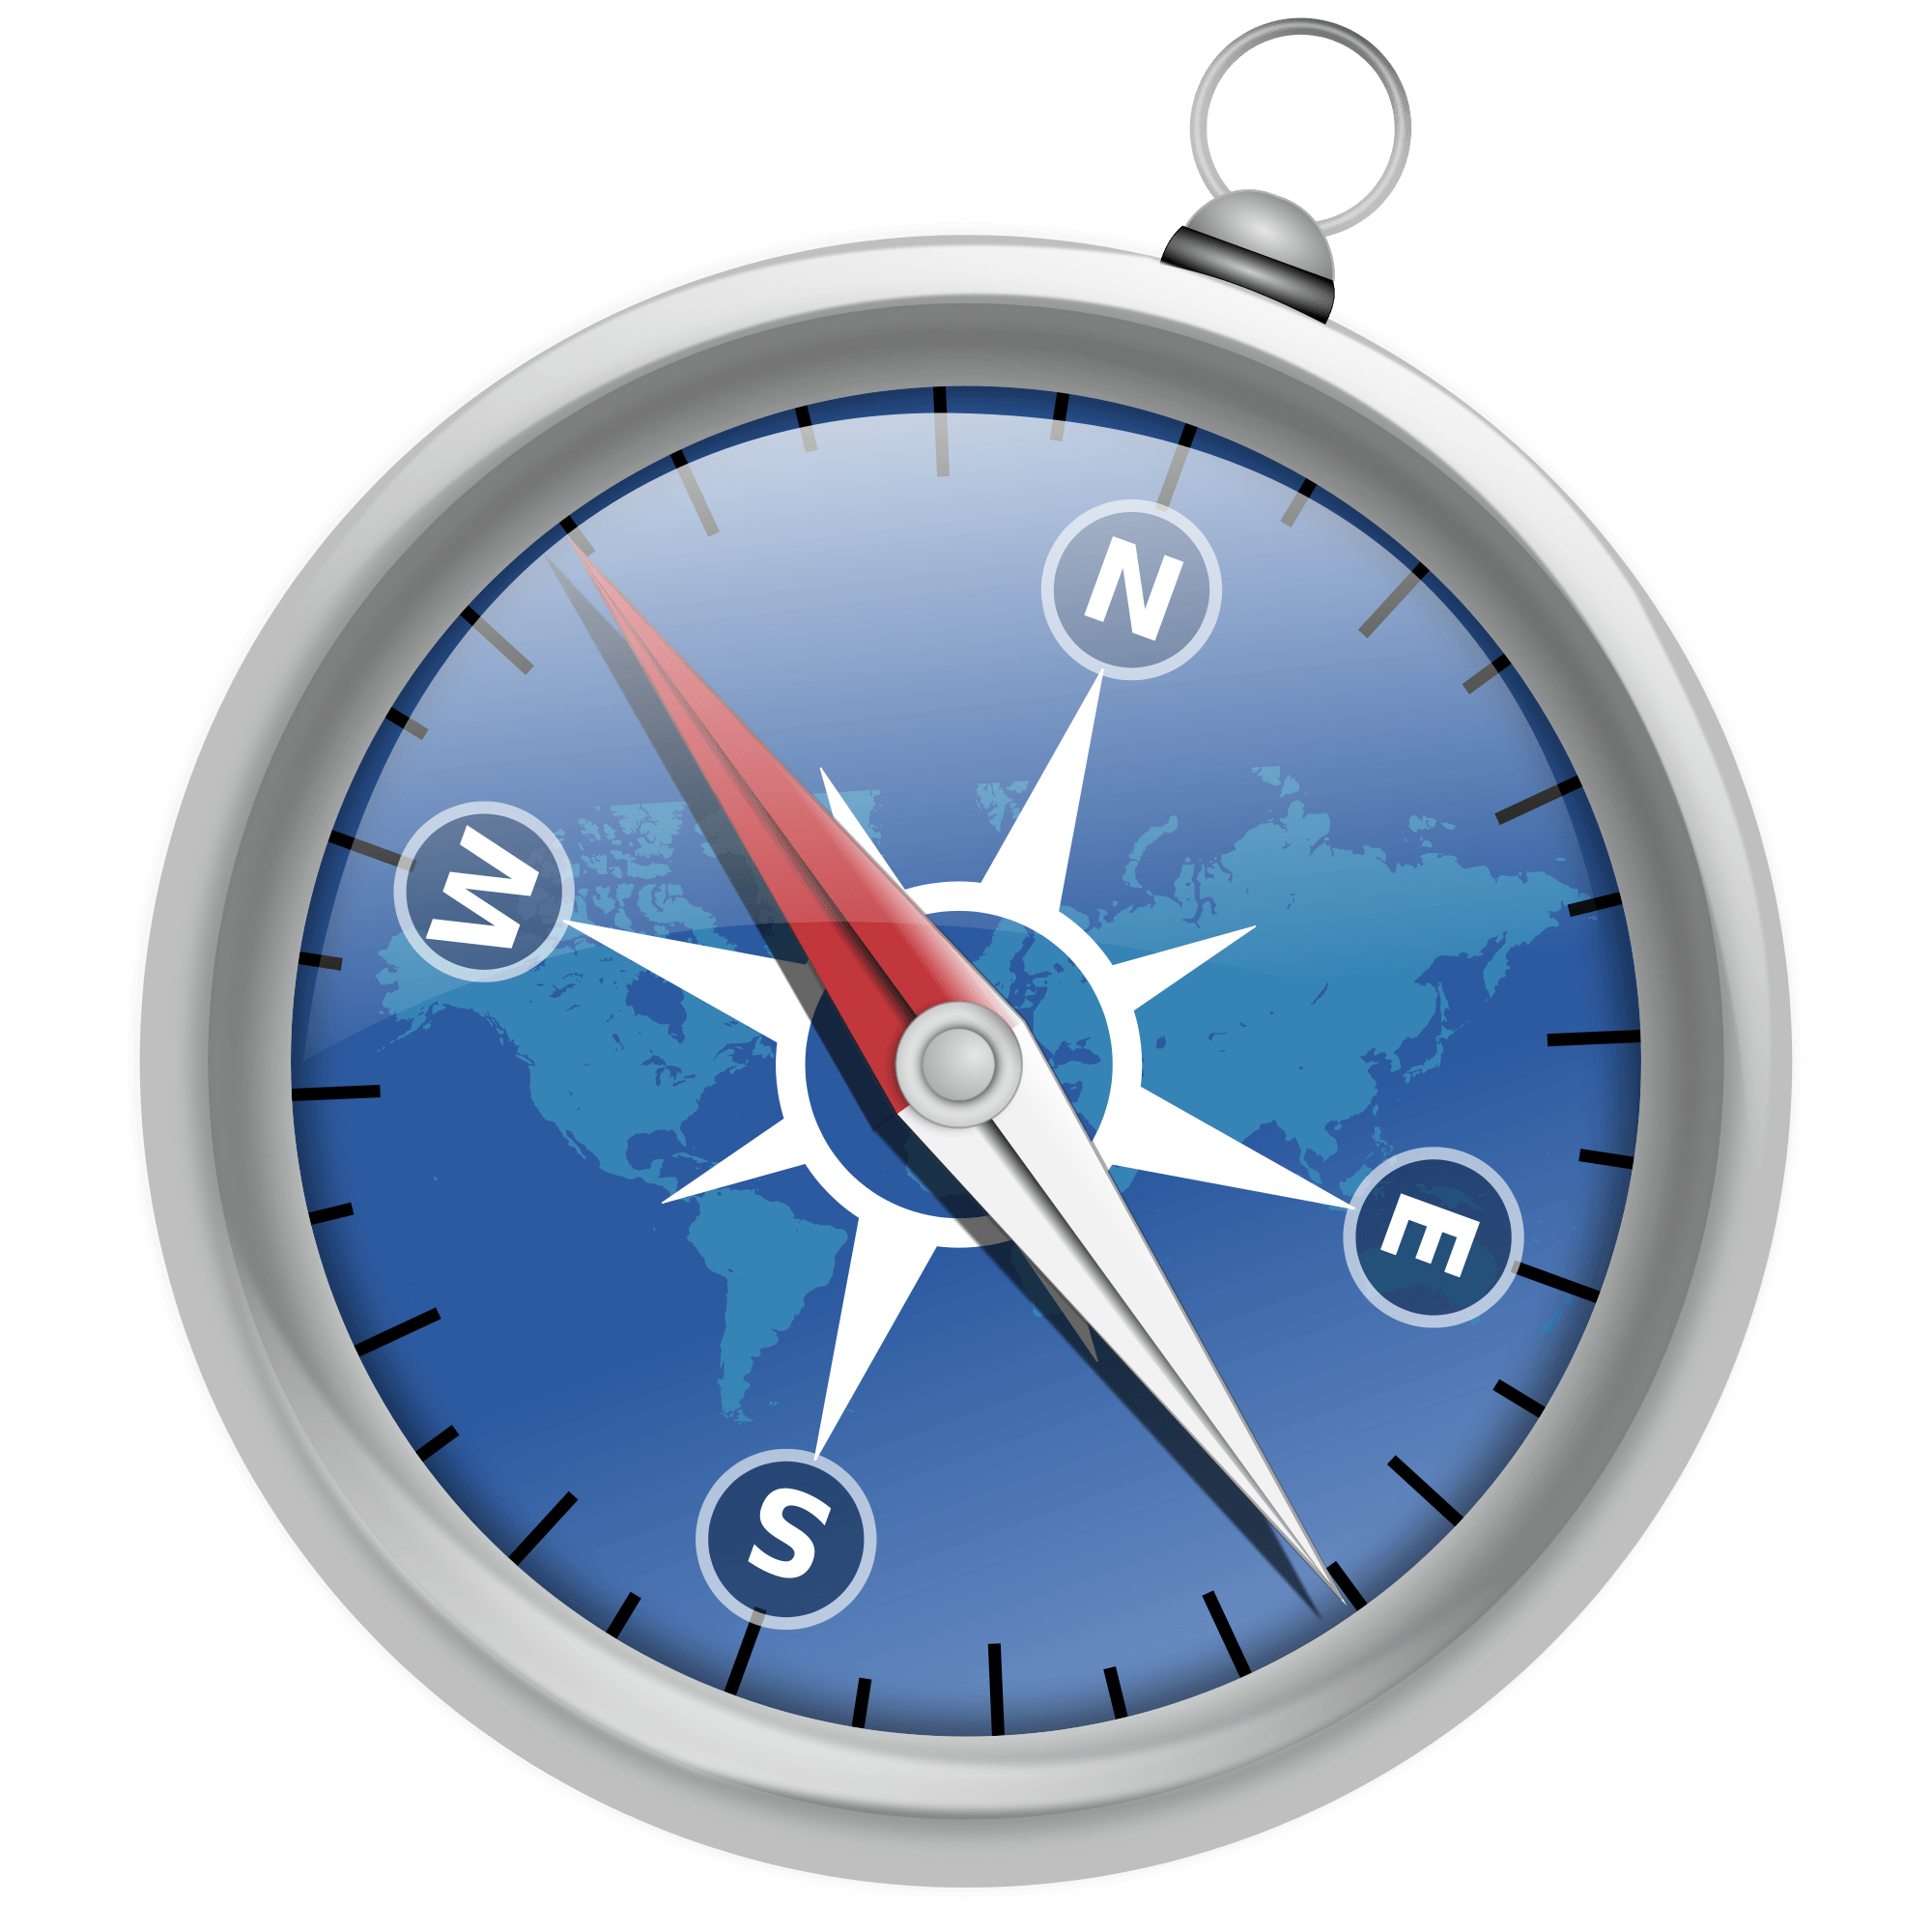 Safari Browser Logo - How To Activate Tabbed Browsing In Safari Web Browser | Technobezz